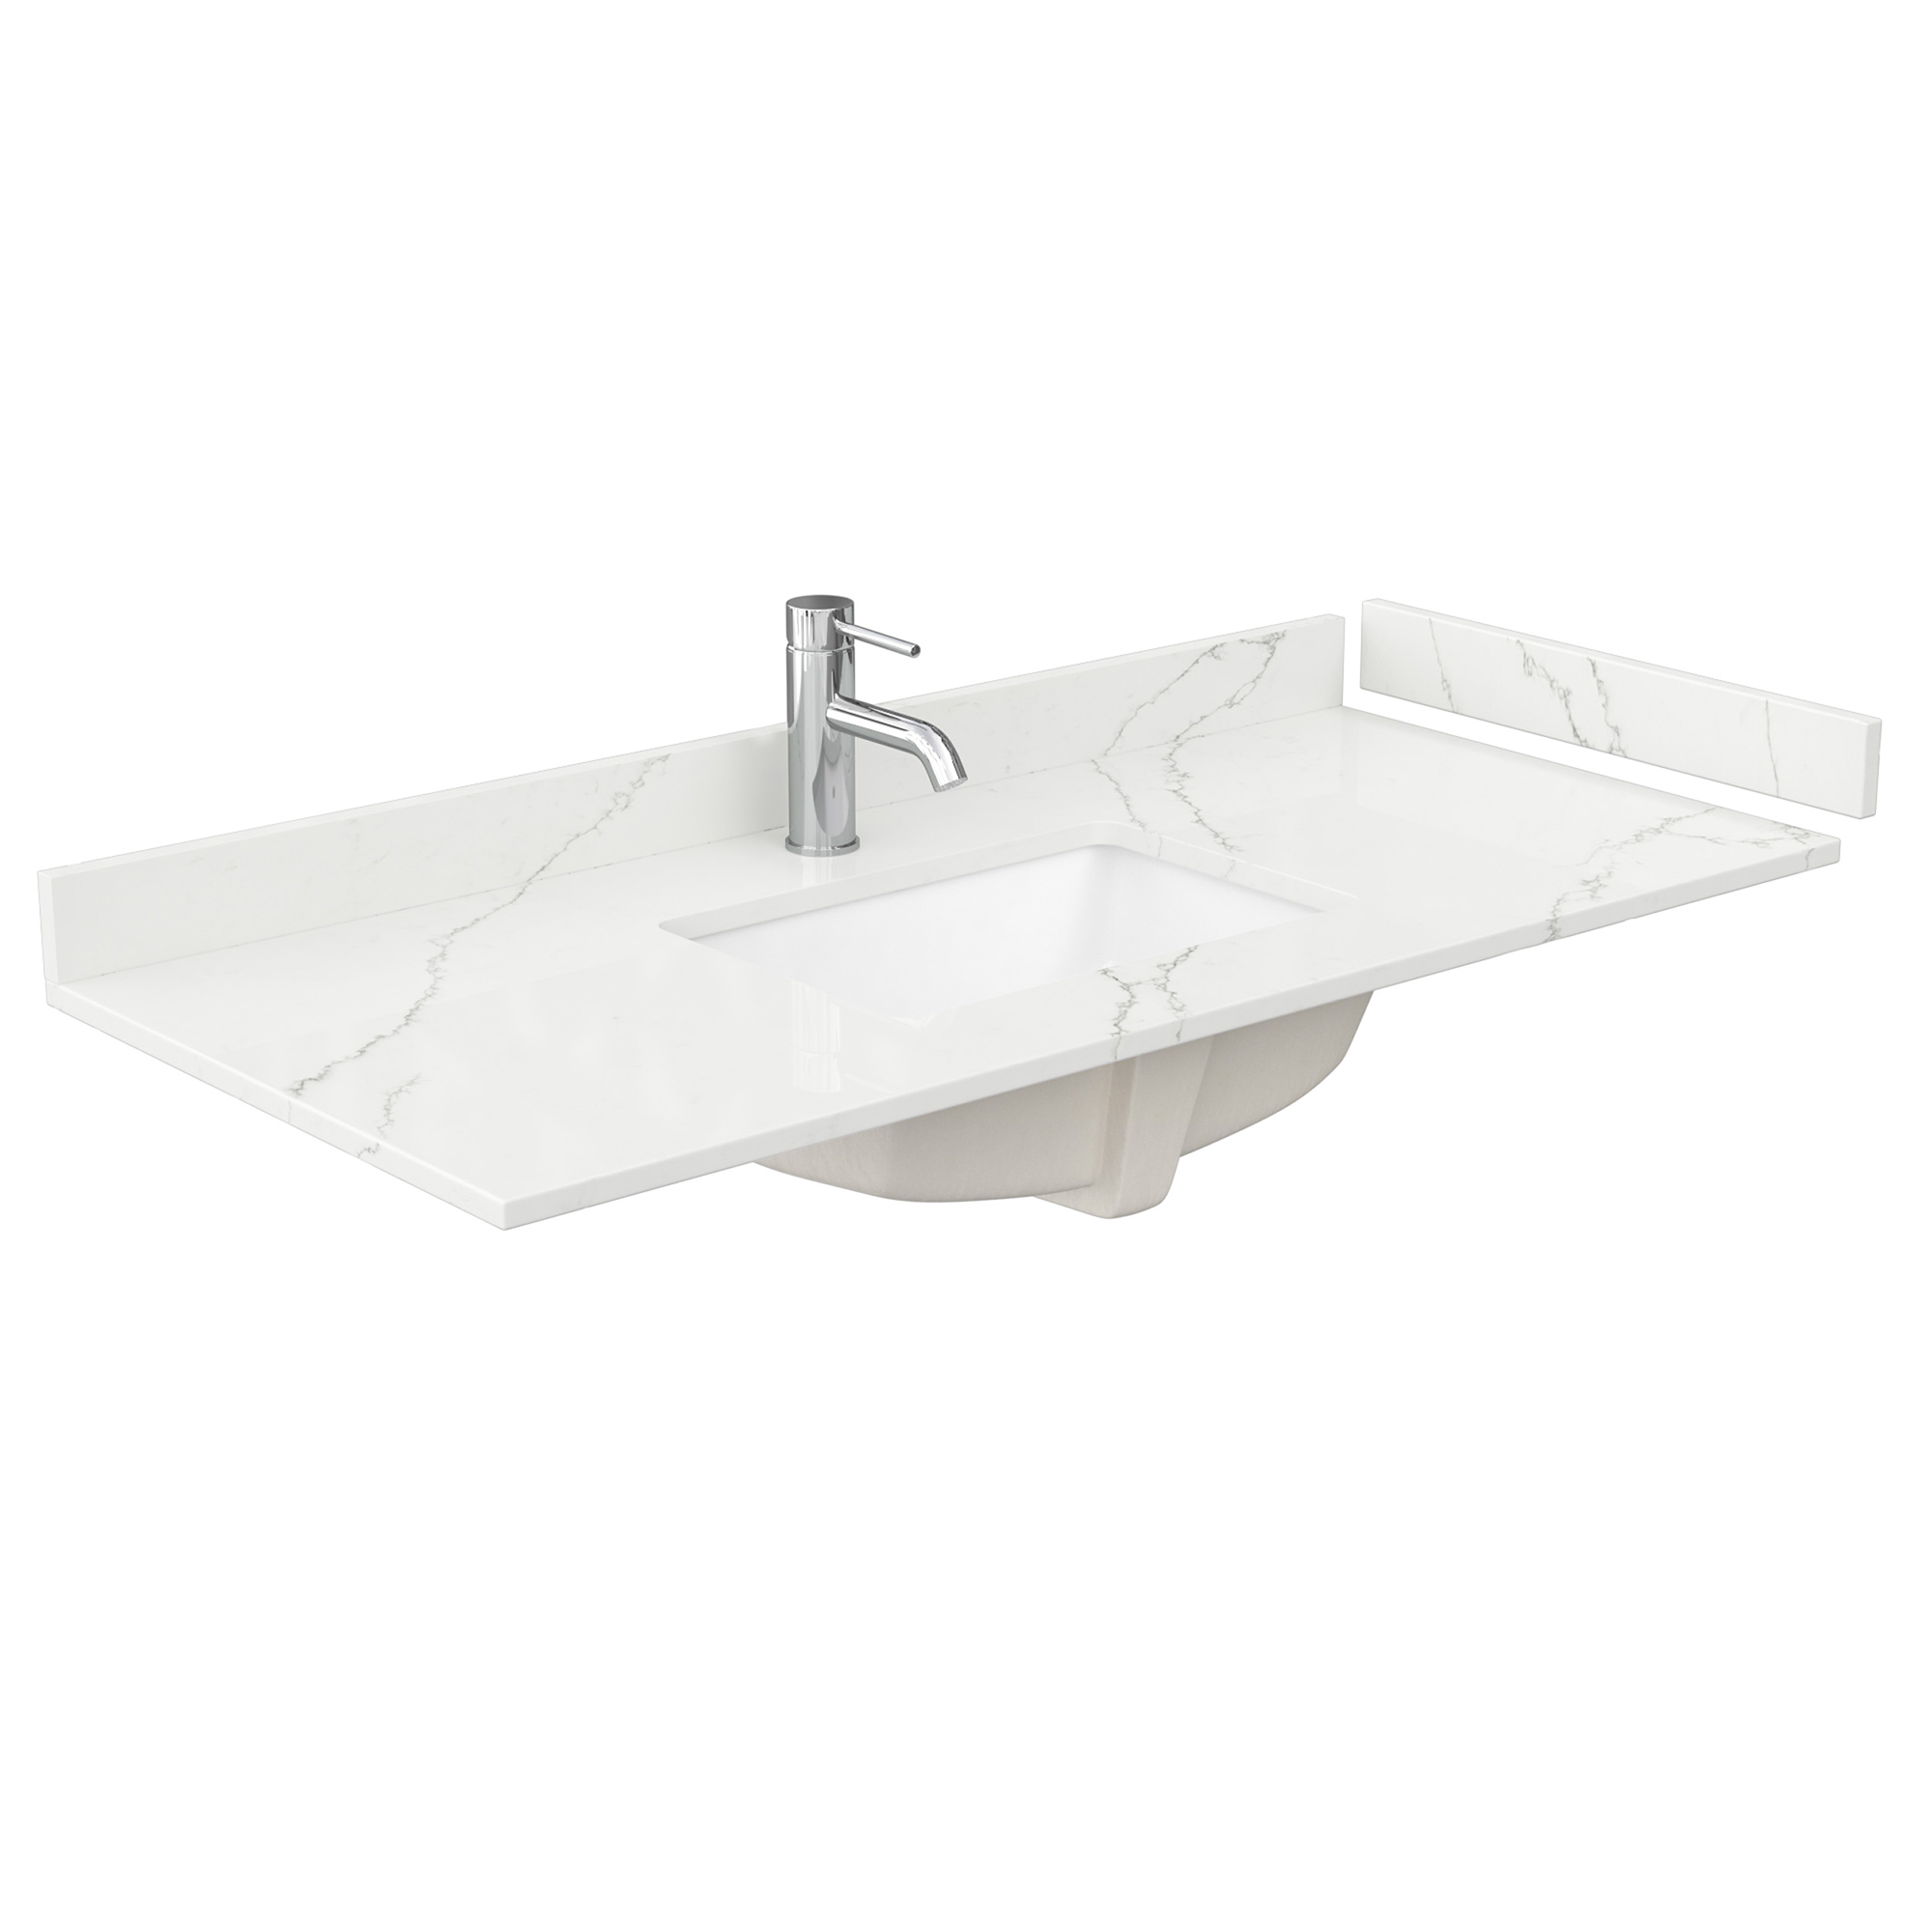 48" Single Countertop - Giotto Quartz (8066) with Undermount Square Sink (1-Hole) - Includes Backsplash and Sidesplash WCFQC148STOPUNSGT